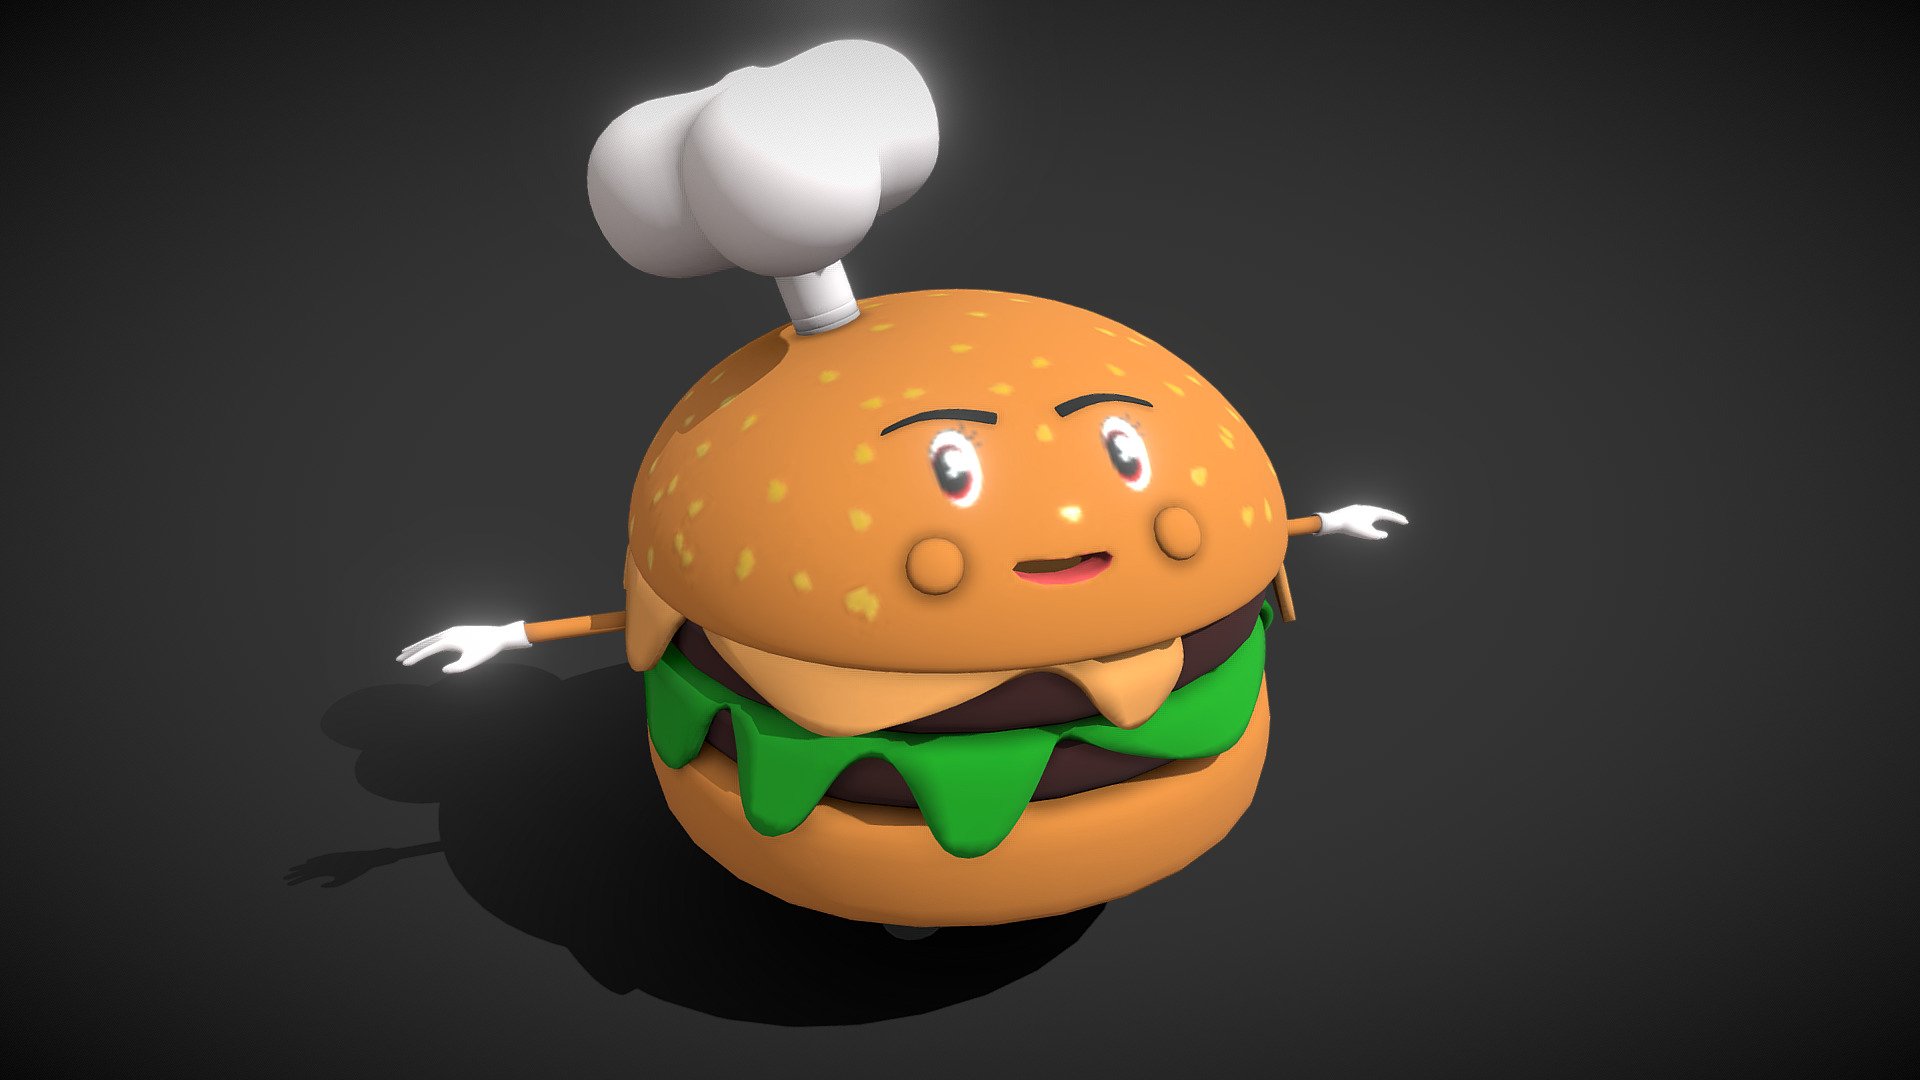 This high-quality 3D model represents a classic burger, a delicious and iconic fast-food item loved worldwide. The model accurately depicts the mouthwatering details and ingredients of a typical burger.

The burger is assembled with precision, featuring a juicy beef patty, fresh lettuce, ripe tomatoes, slices of cheese, pickles, and a perfectly toasted sesame seed bun

The model also accurately represents any additional condiments or toppings that make the burger unique, such as ketchup, mustard, mayonnaise, or special sauces.

It is provided in a standard file format compatible with Sketchfab and other 3D software.

Whether you need it for food presentations, restaurant menus, or any other creative project, this 3D model of a burger will help you accurately visualize and showcase the delectable dish in a virtual environment, making viewers crave a tasty bite.

Note: This 3D model is a digital representation of a burger and is not for consumption 3d model